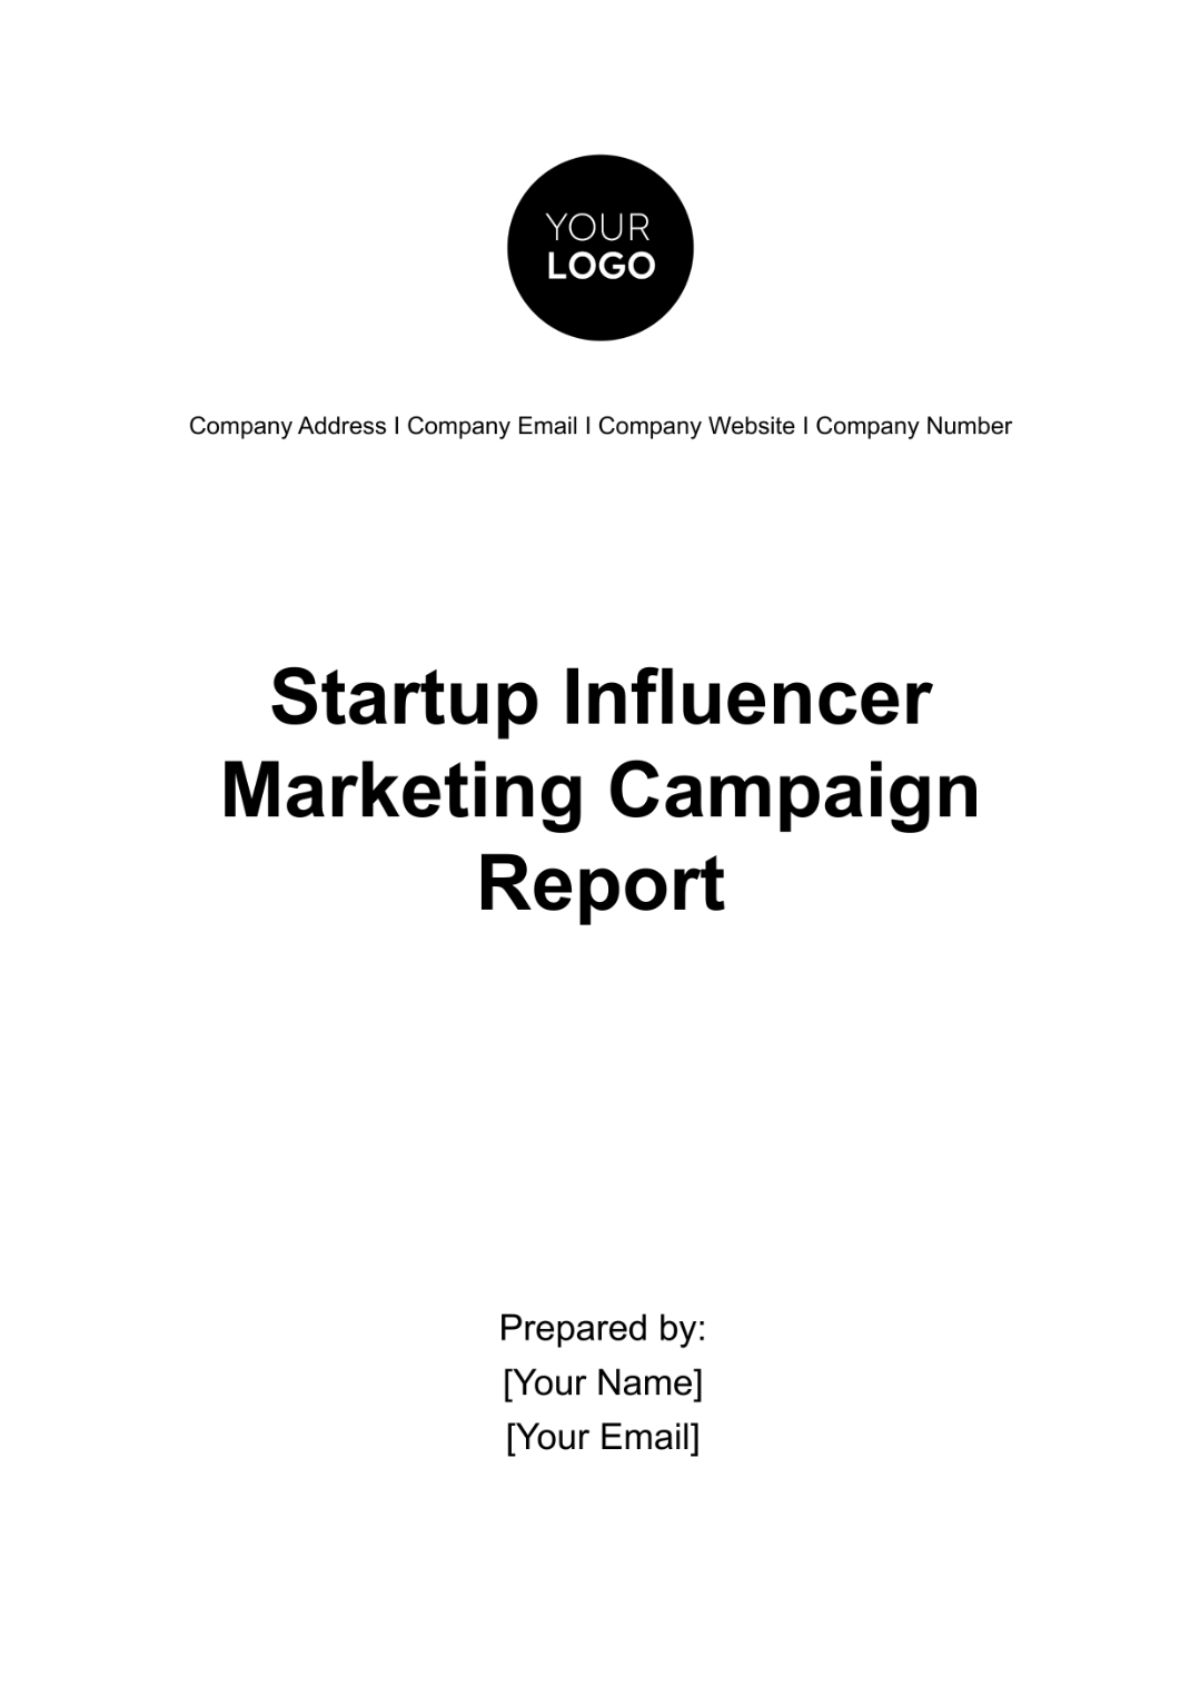 Startup Influencer Marketing Campaign Report Template